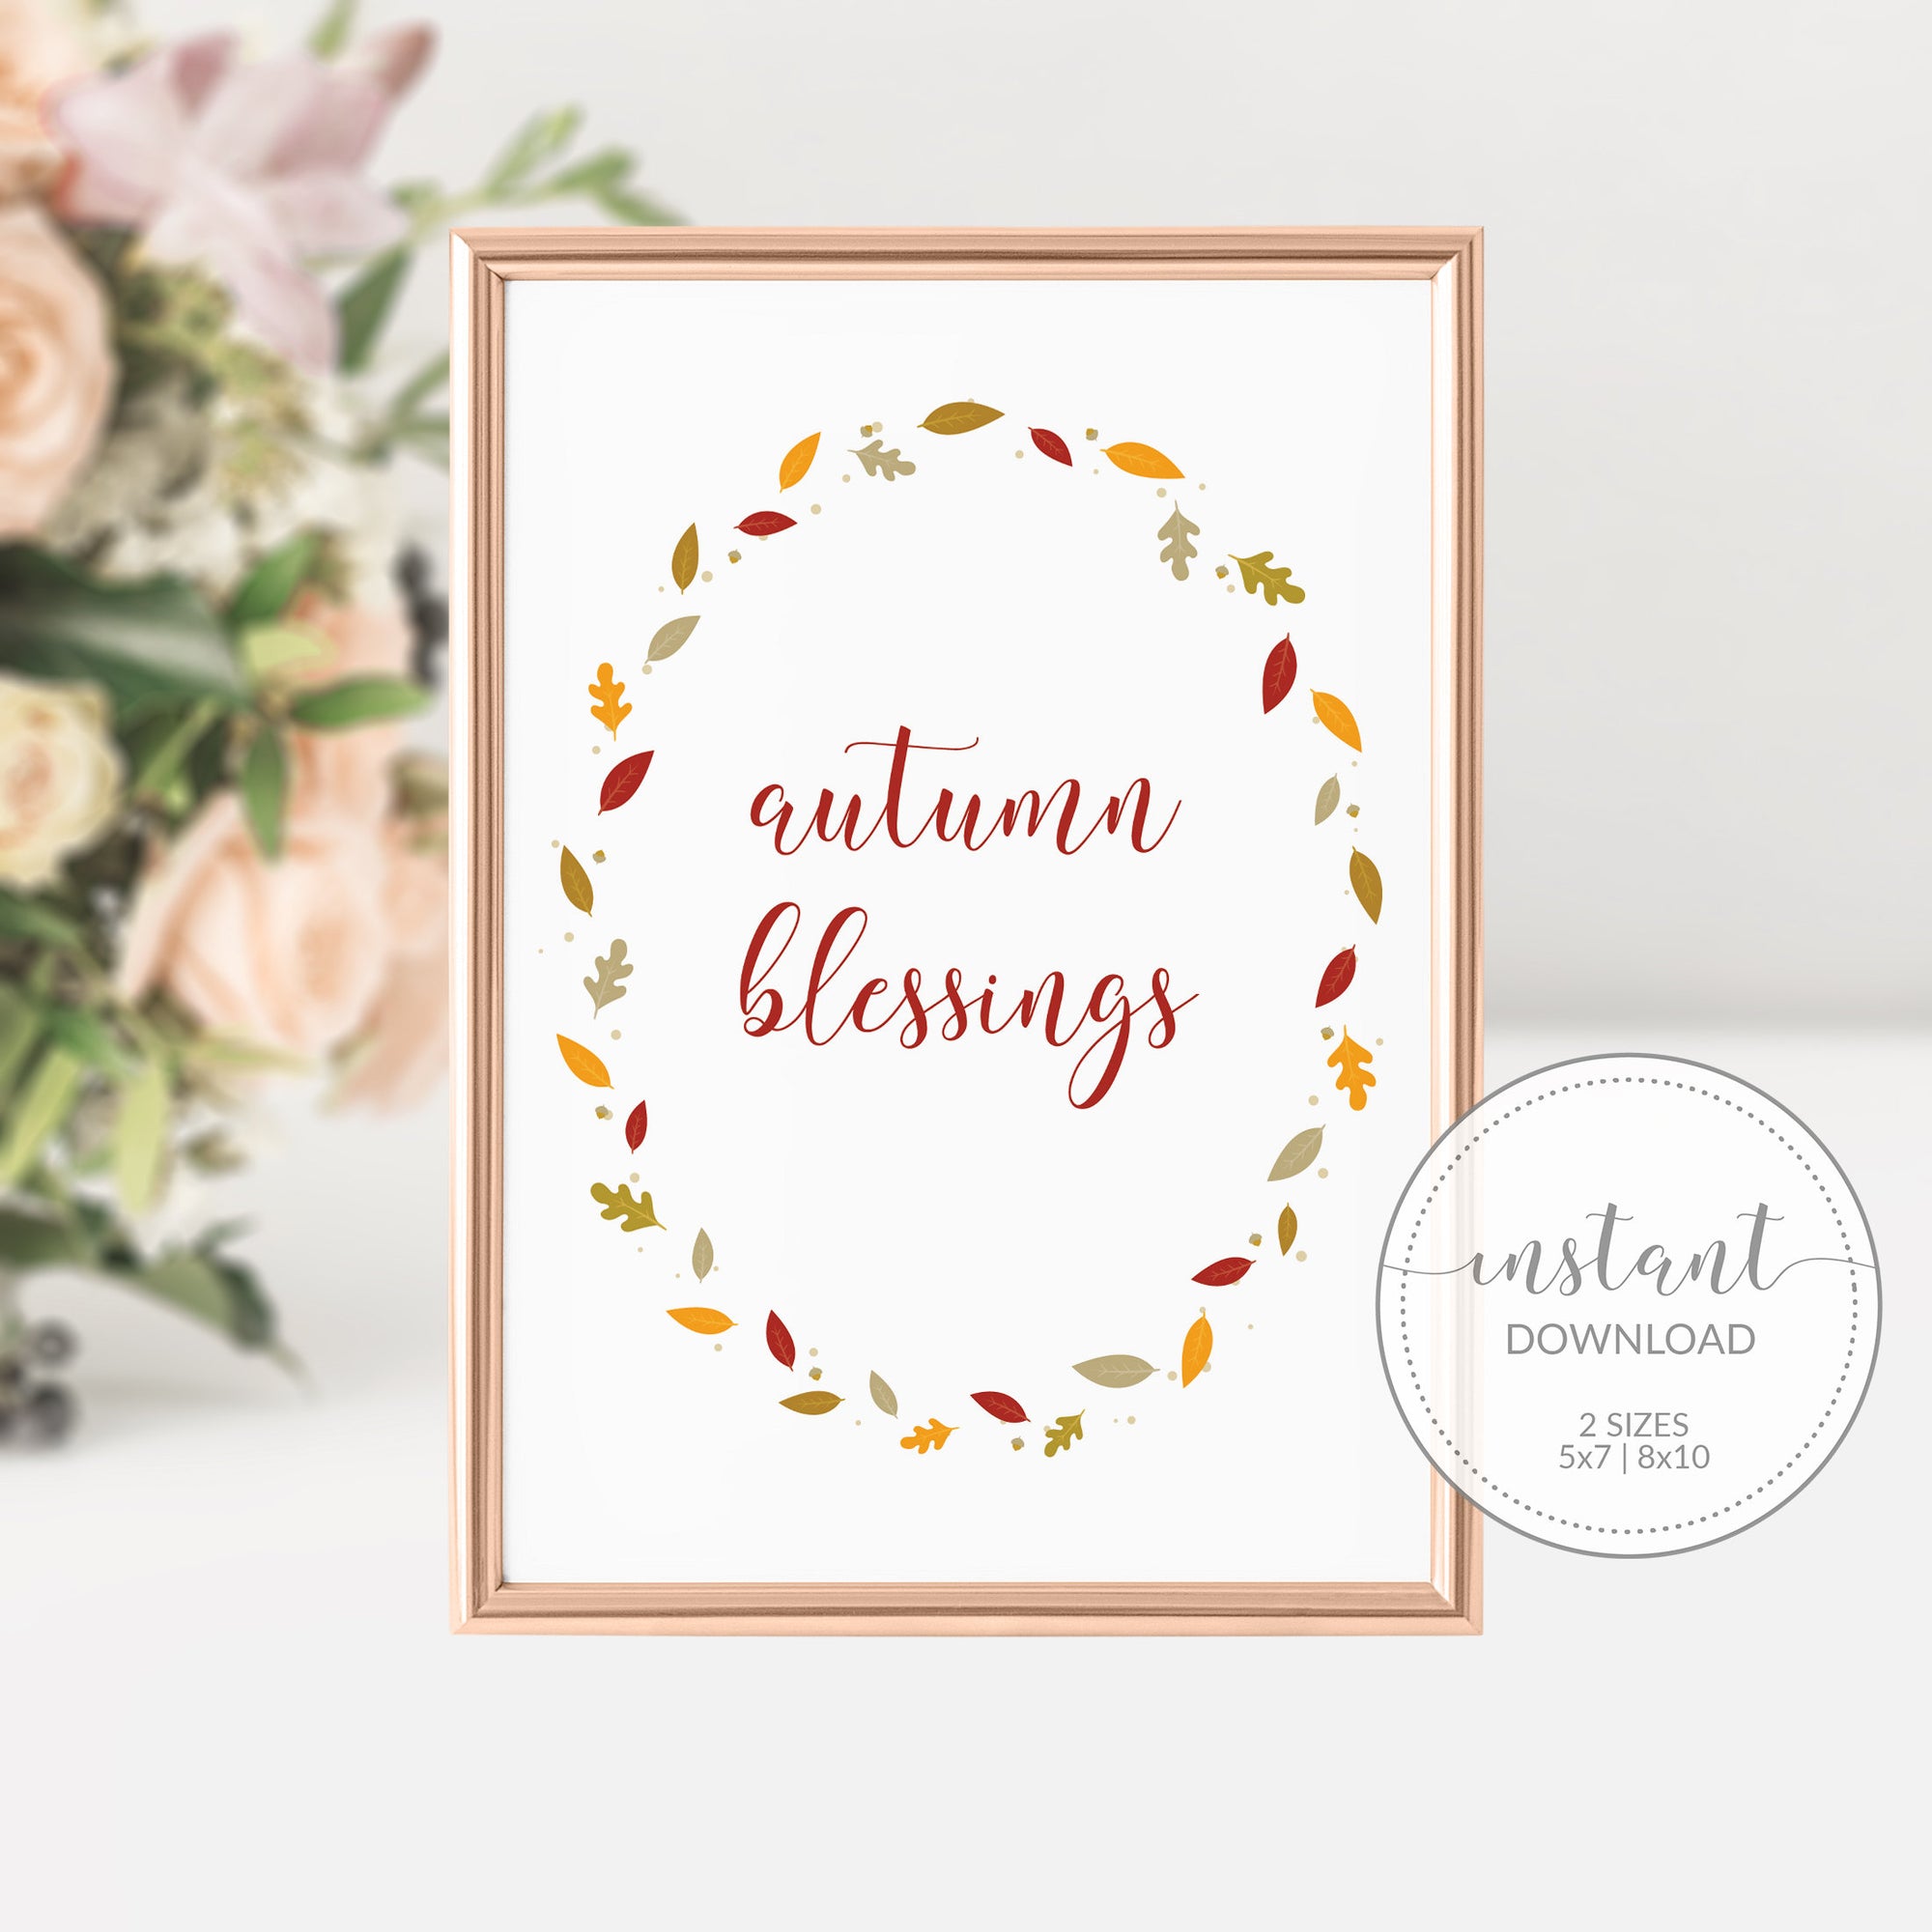 Autumn Blessings Sign, Thanksgiving Decorations, Fall Decor Leaves, Printable Fall Decor for Mantle, INSTANT DOWNLOAD - FL100 - @PlumPolkaDot 